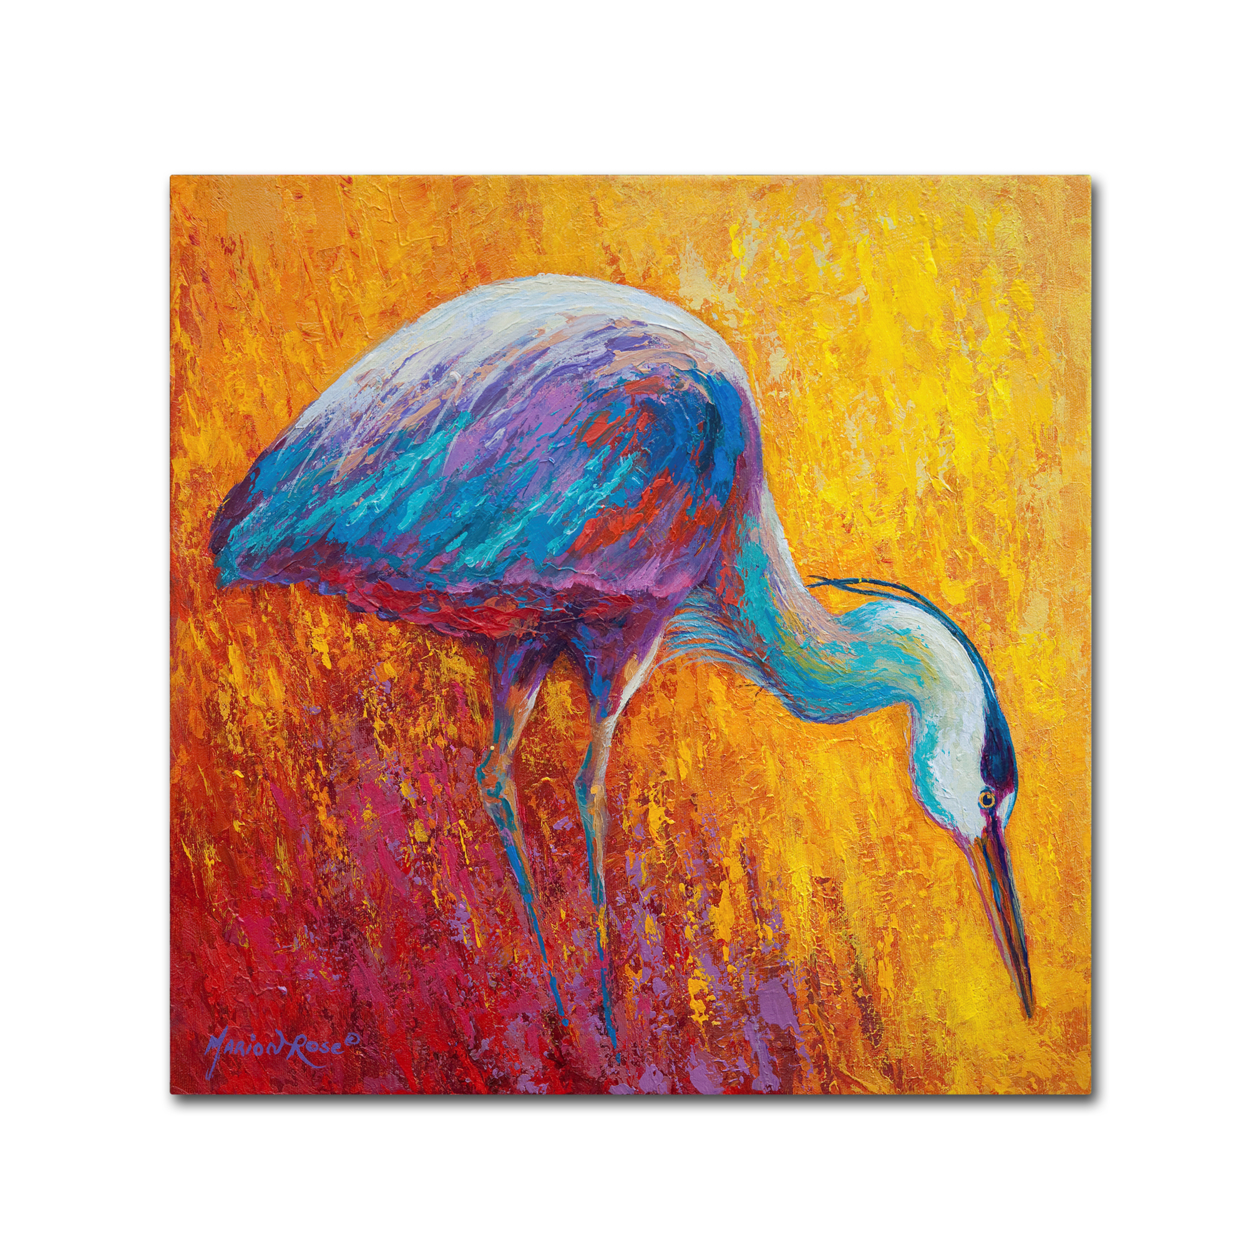 Marion Rose 'Daddy Long Legs IV' Ready To Hang Canvas Art 35 X 35 Inches Made In USA